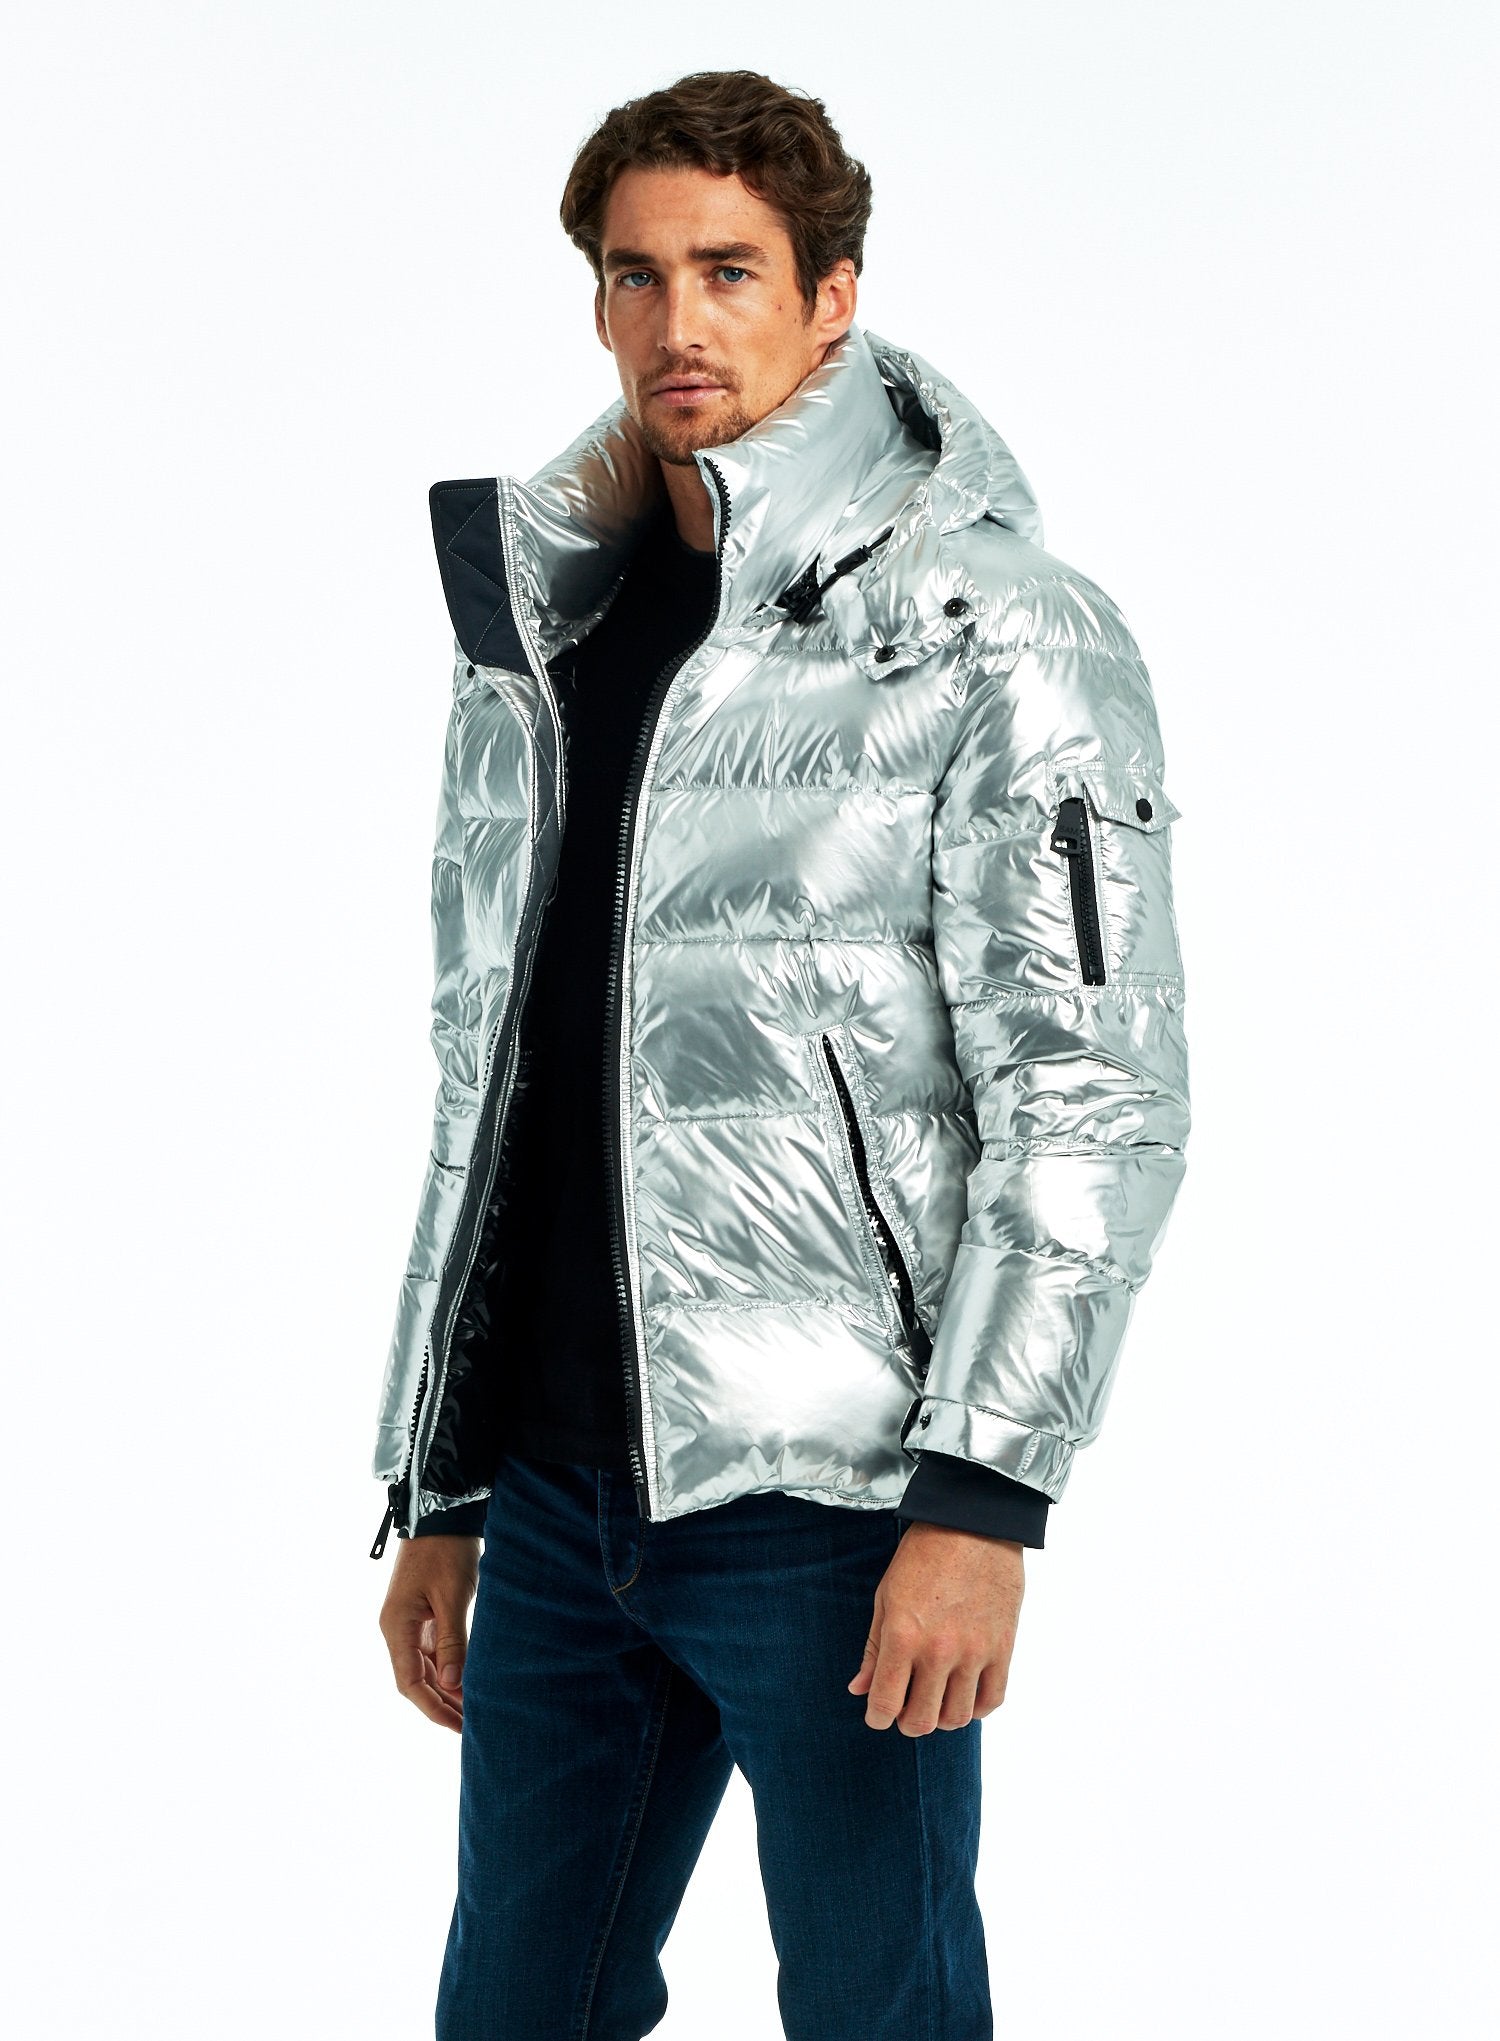 In The Mix Denim Shiny Puffer in Silver